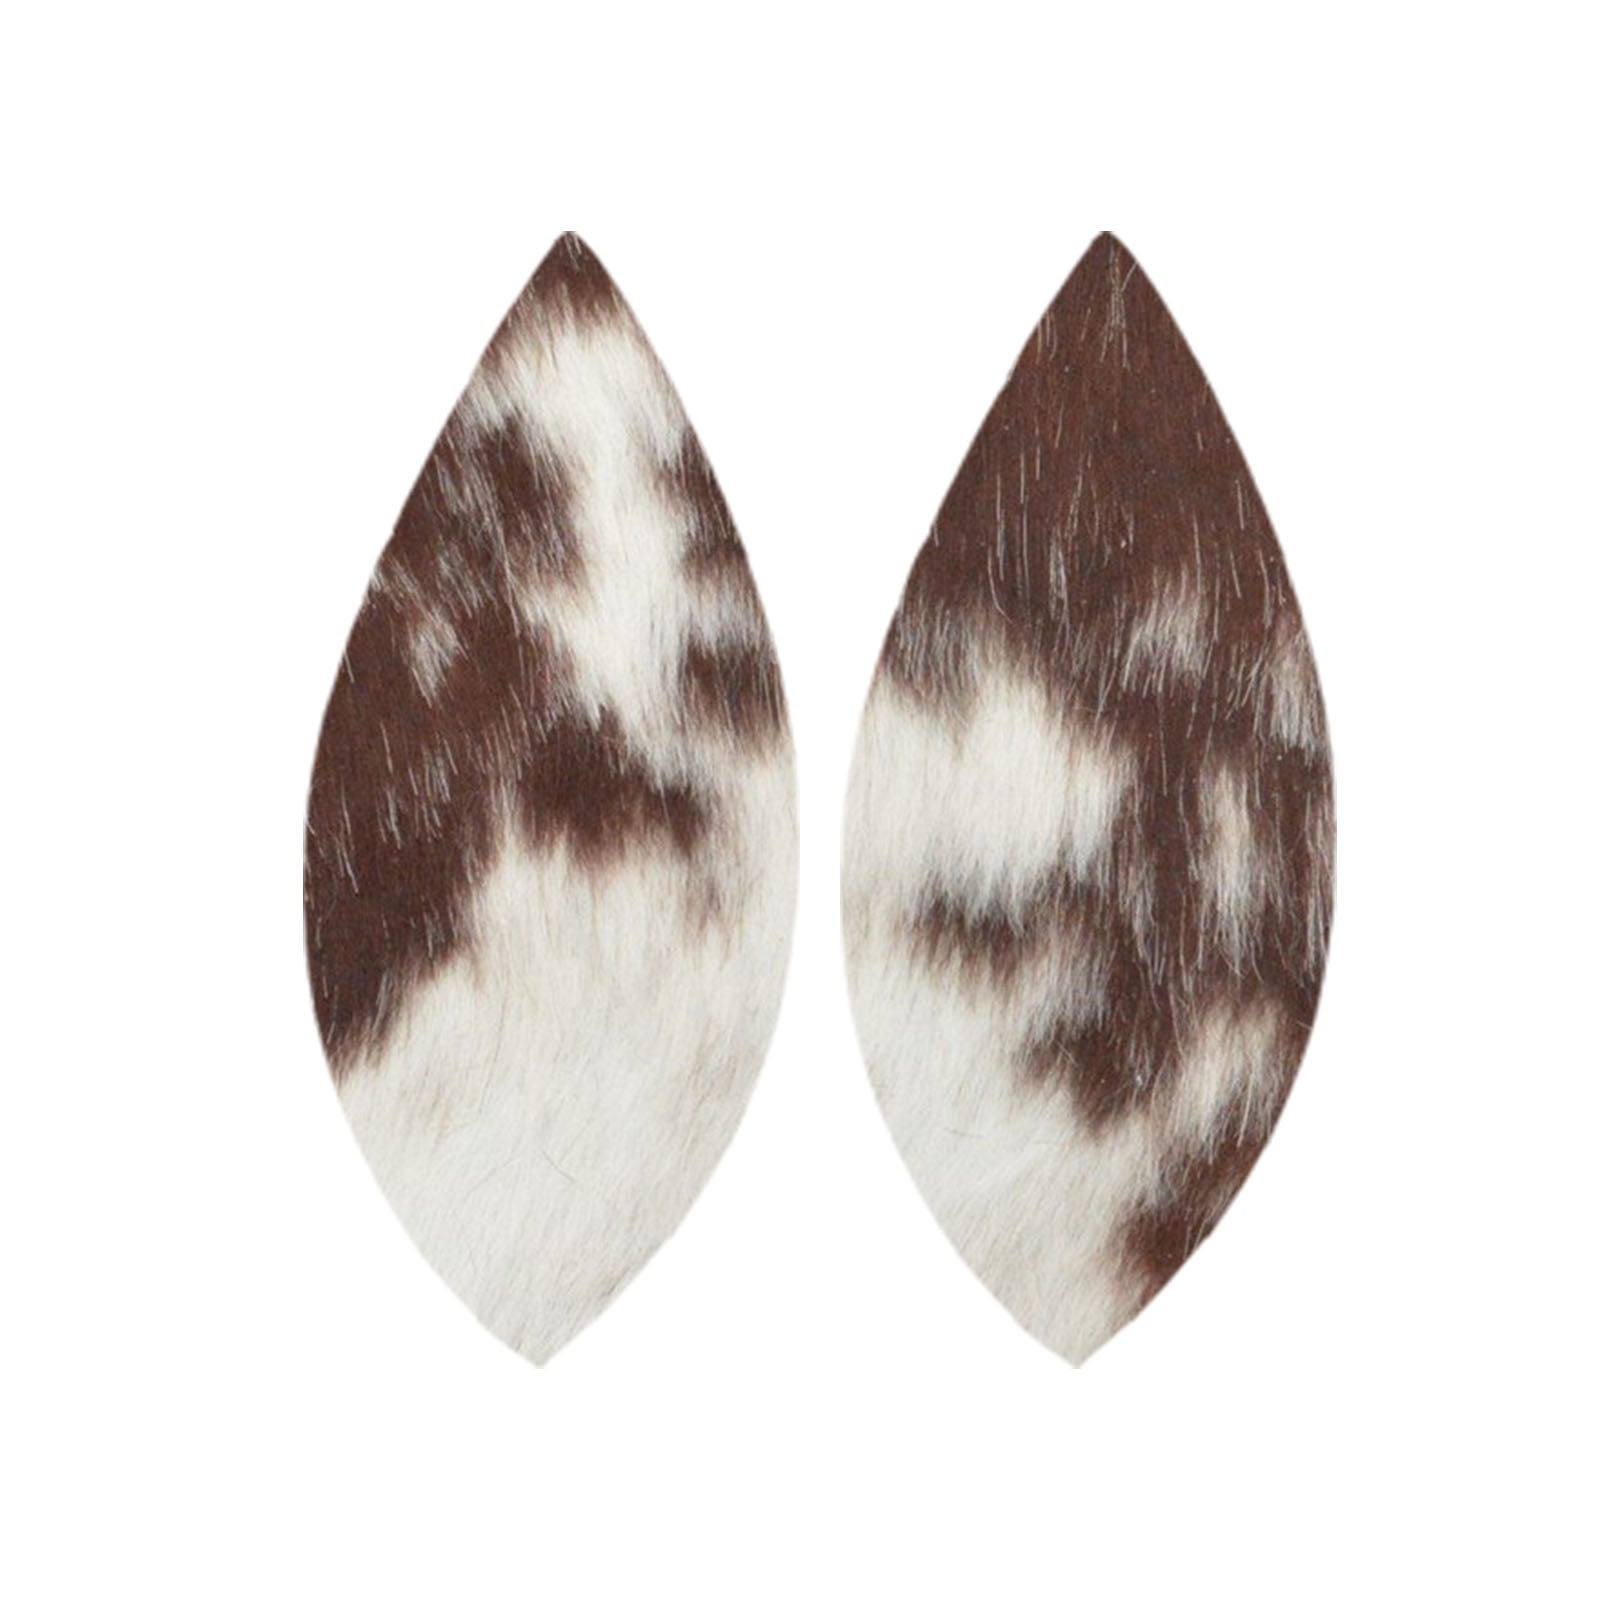 Bi-Color Medium Brown and Off-White Hair On Die Cut Earrings, Feather | The Leather Guy